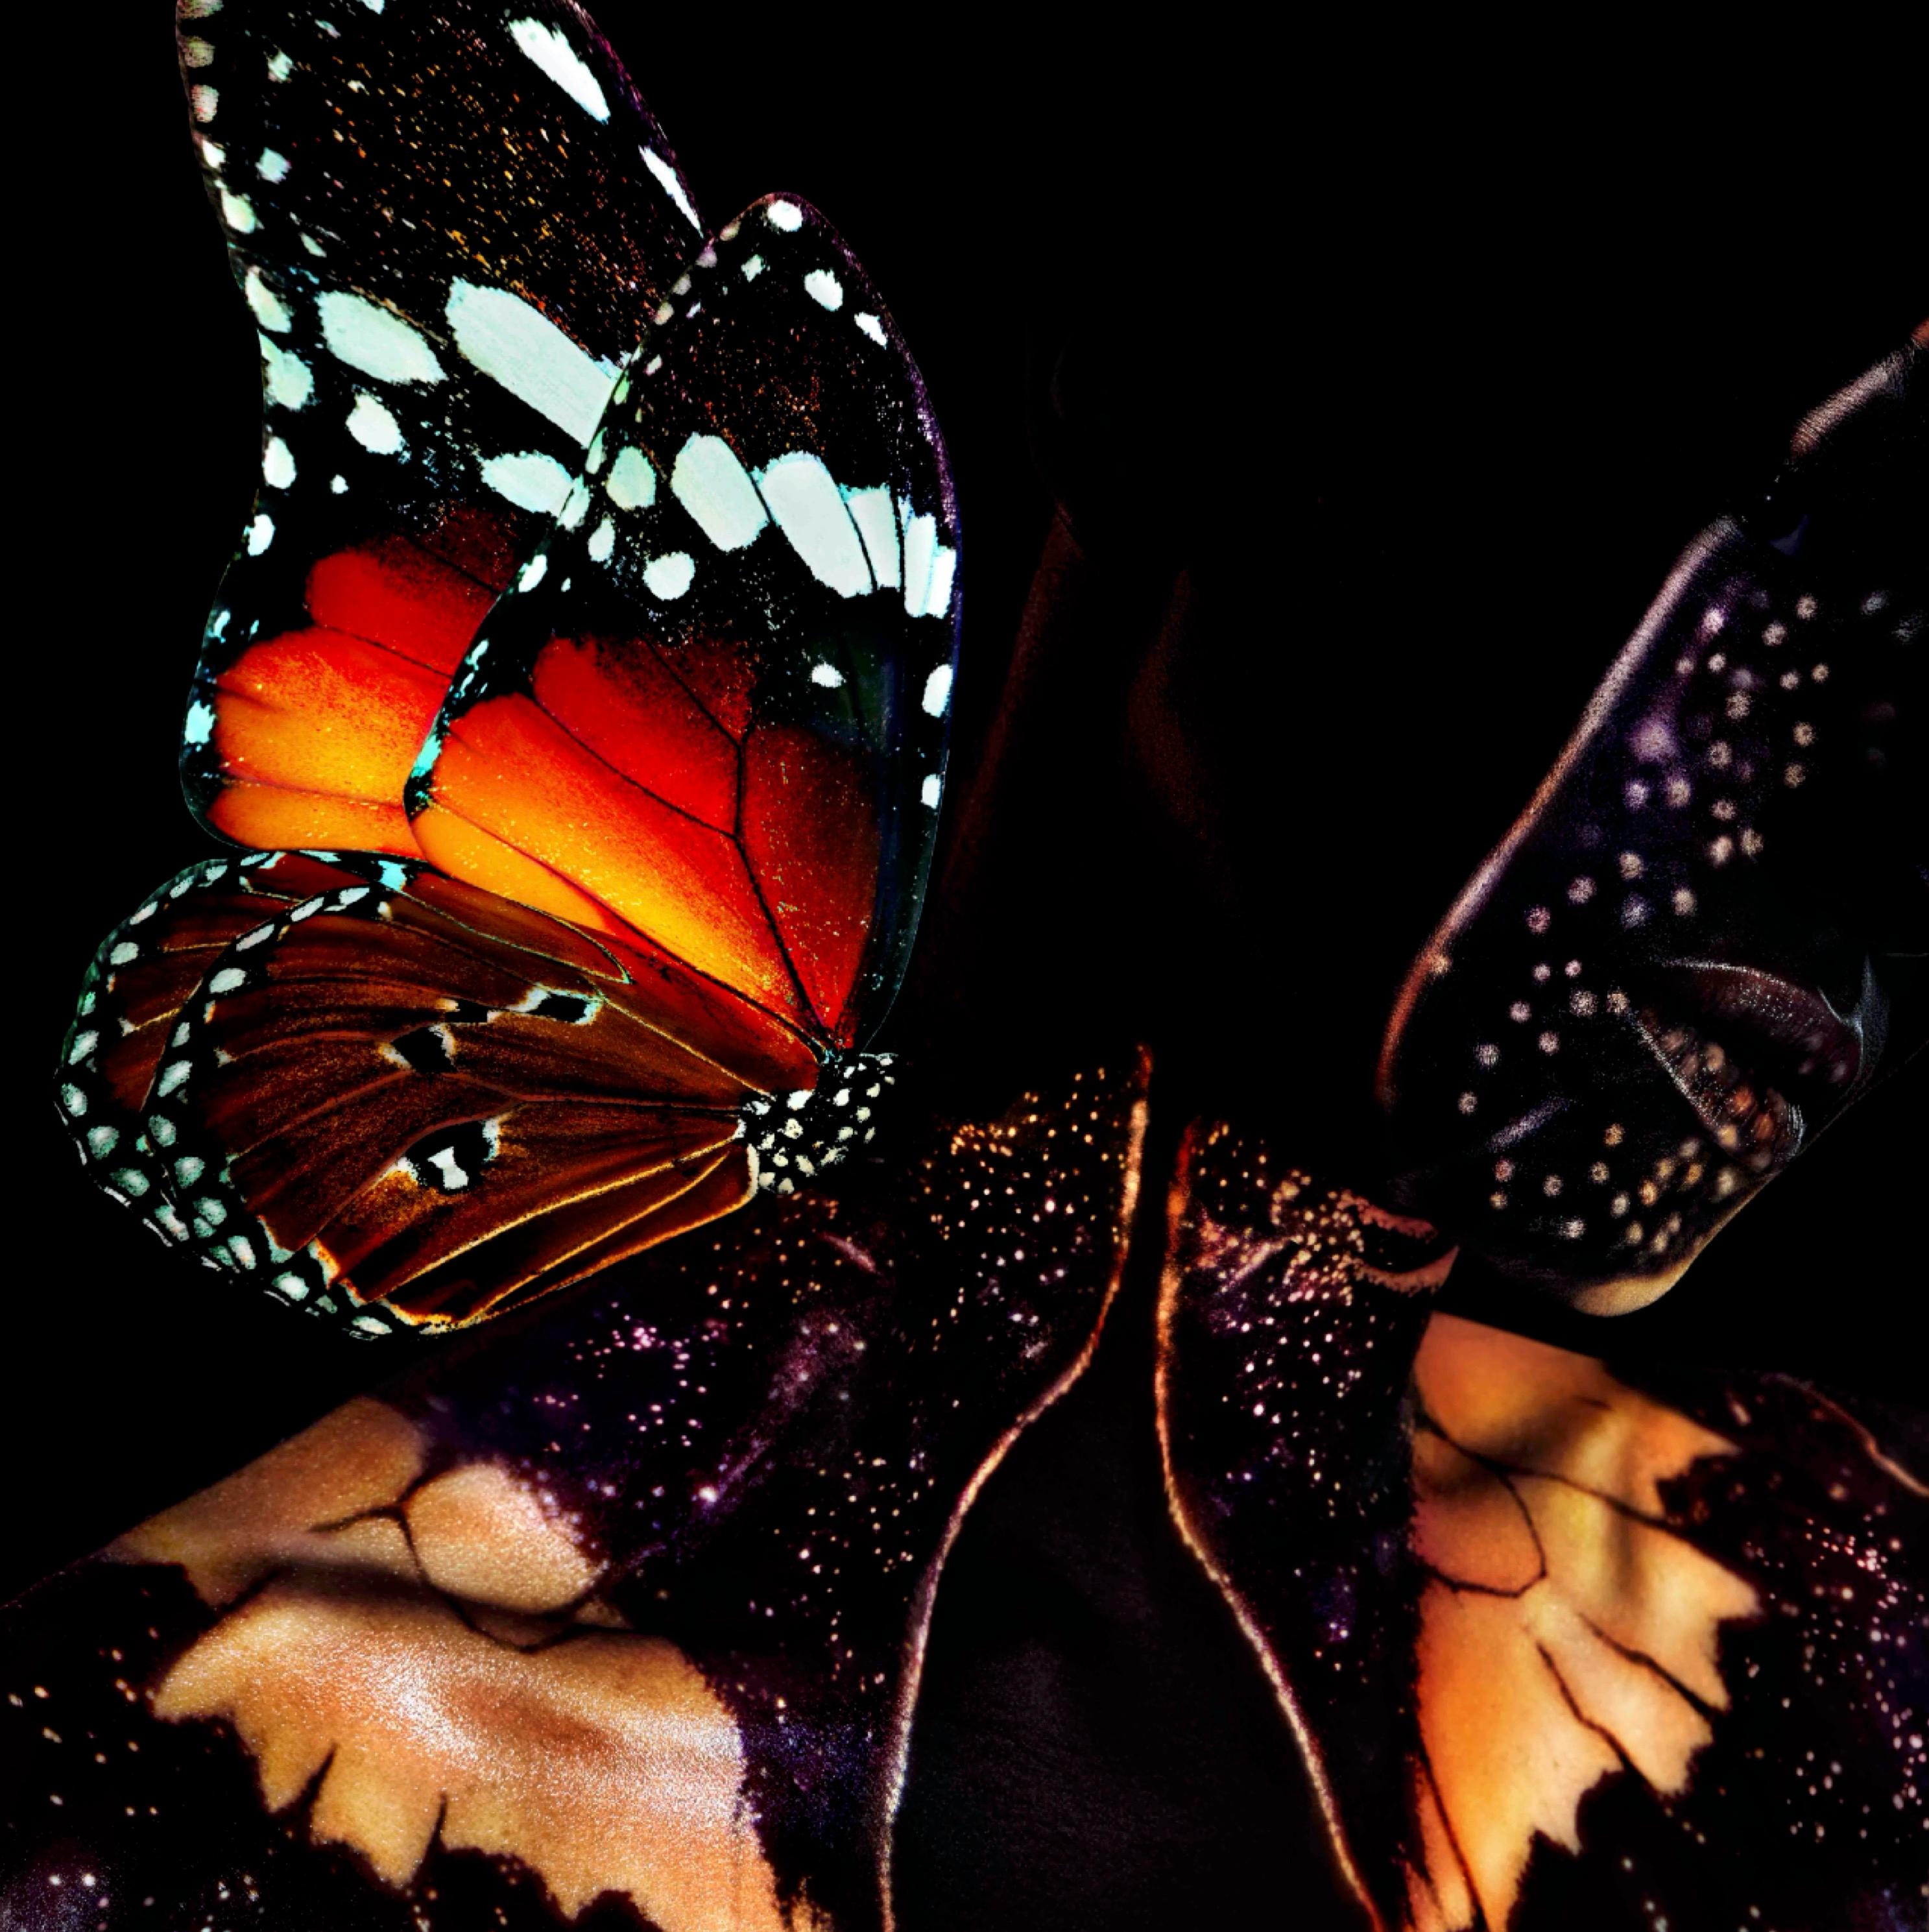 "Butterfly 22" Photography (FRAMED) 50" x 50" inch Edition 2/8 by Giuliano Bekor